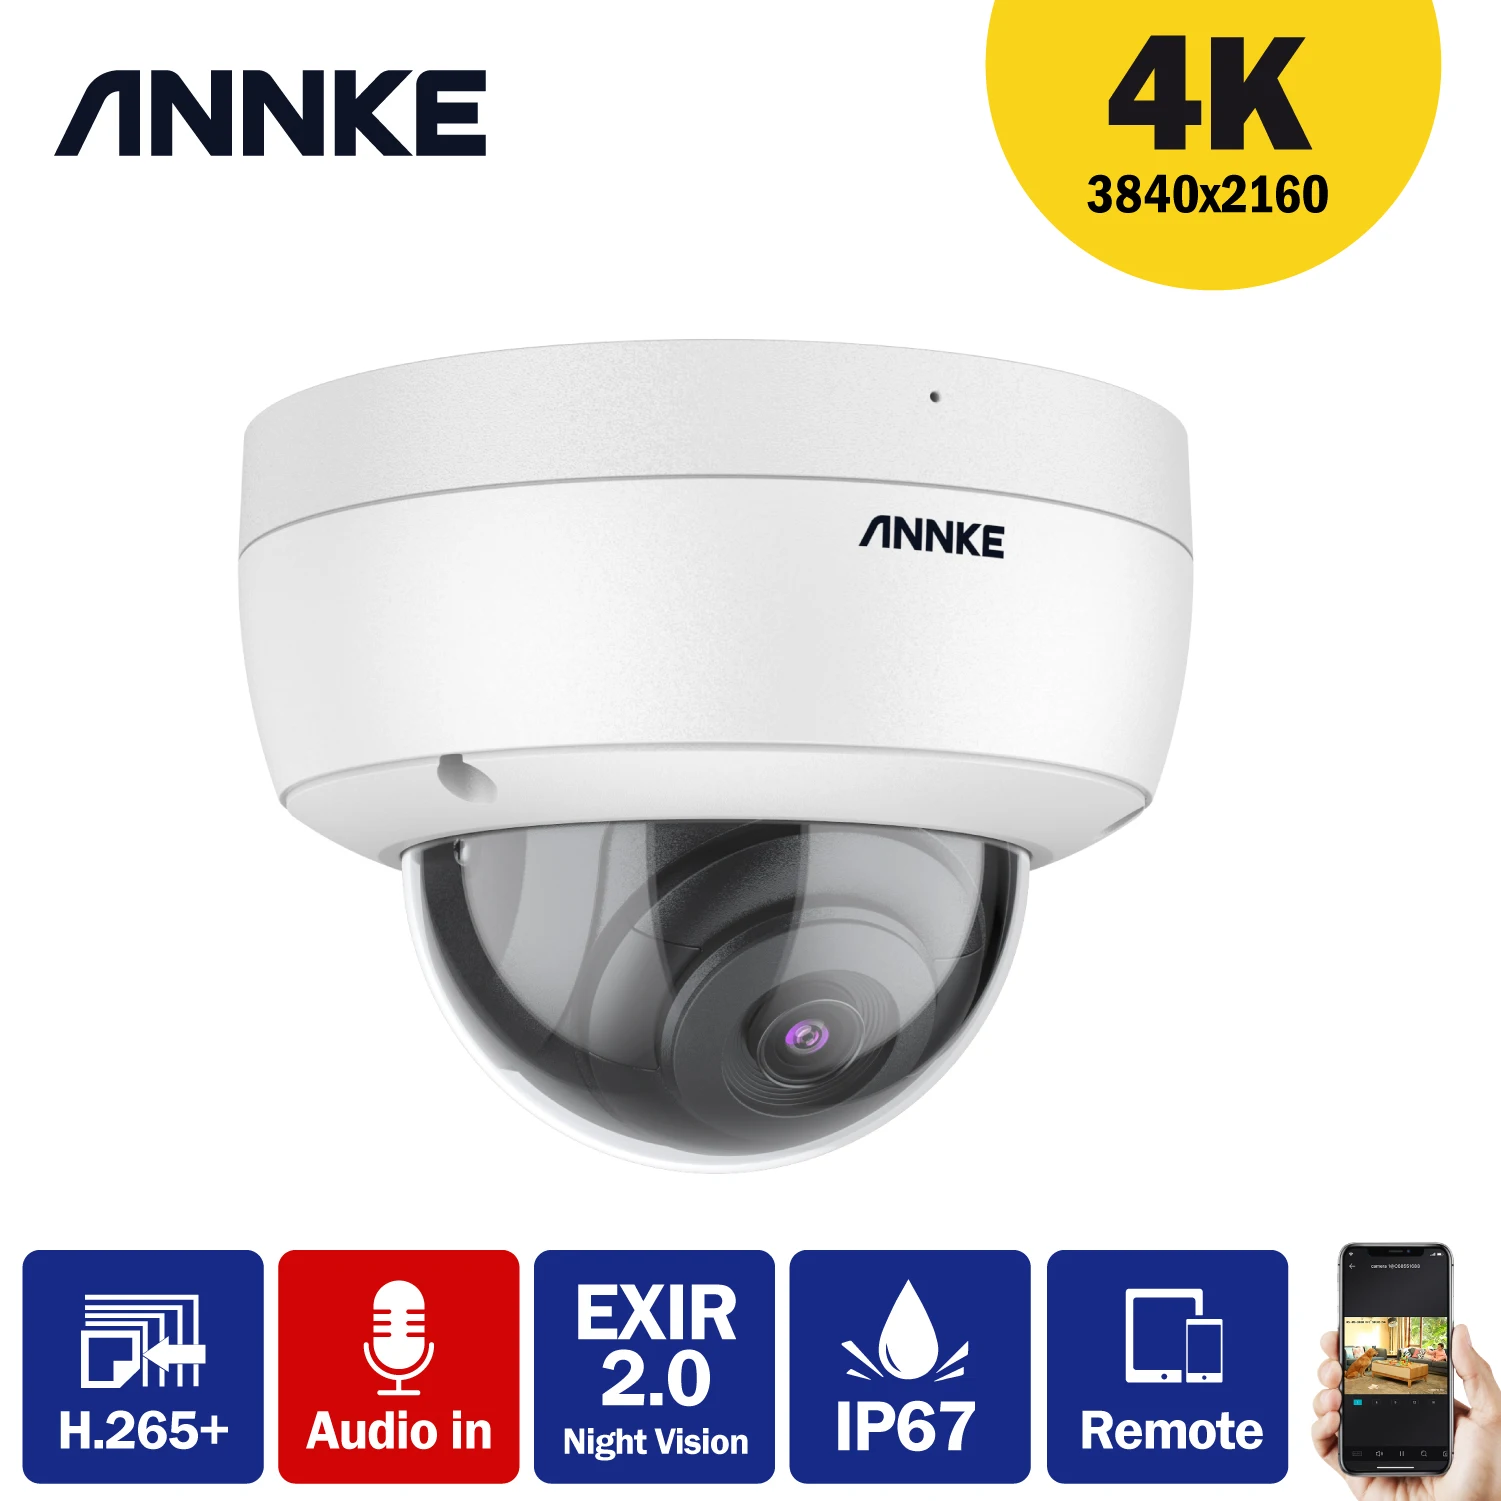 ANNKE 1PC Ultra HD 8MP POE Camera 4K Outdoor Indoor Weatherproof Security Network Dome EXIR Night Vision Email Alert CCTV Camera